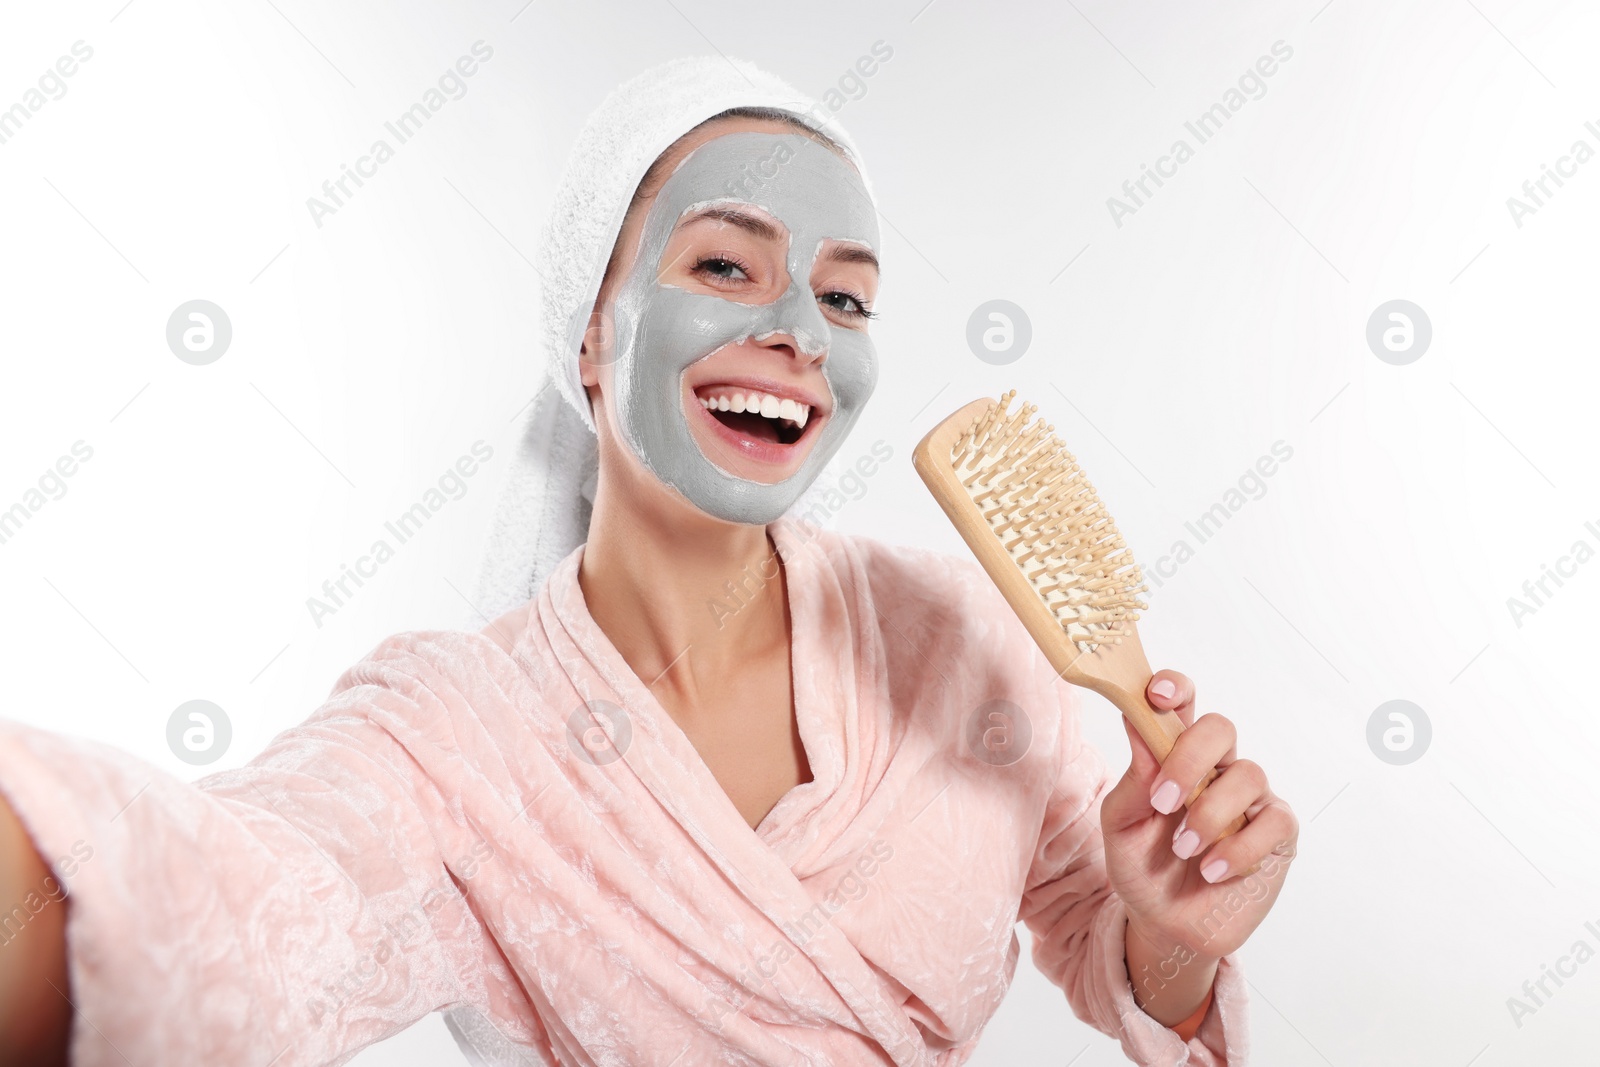 Photo of Woman with face mask and brush singing while taking selfie on white background. Spa treatments